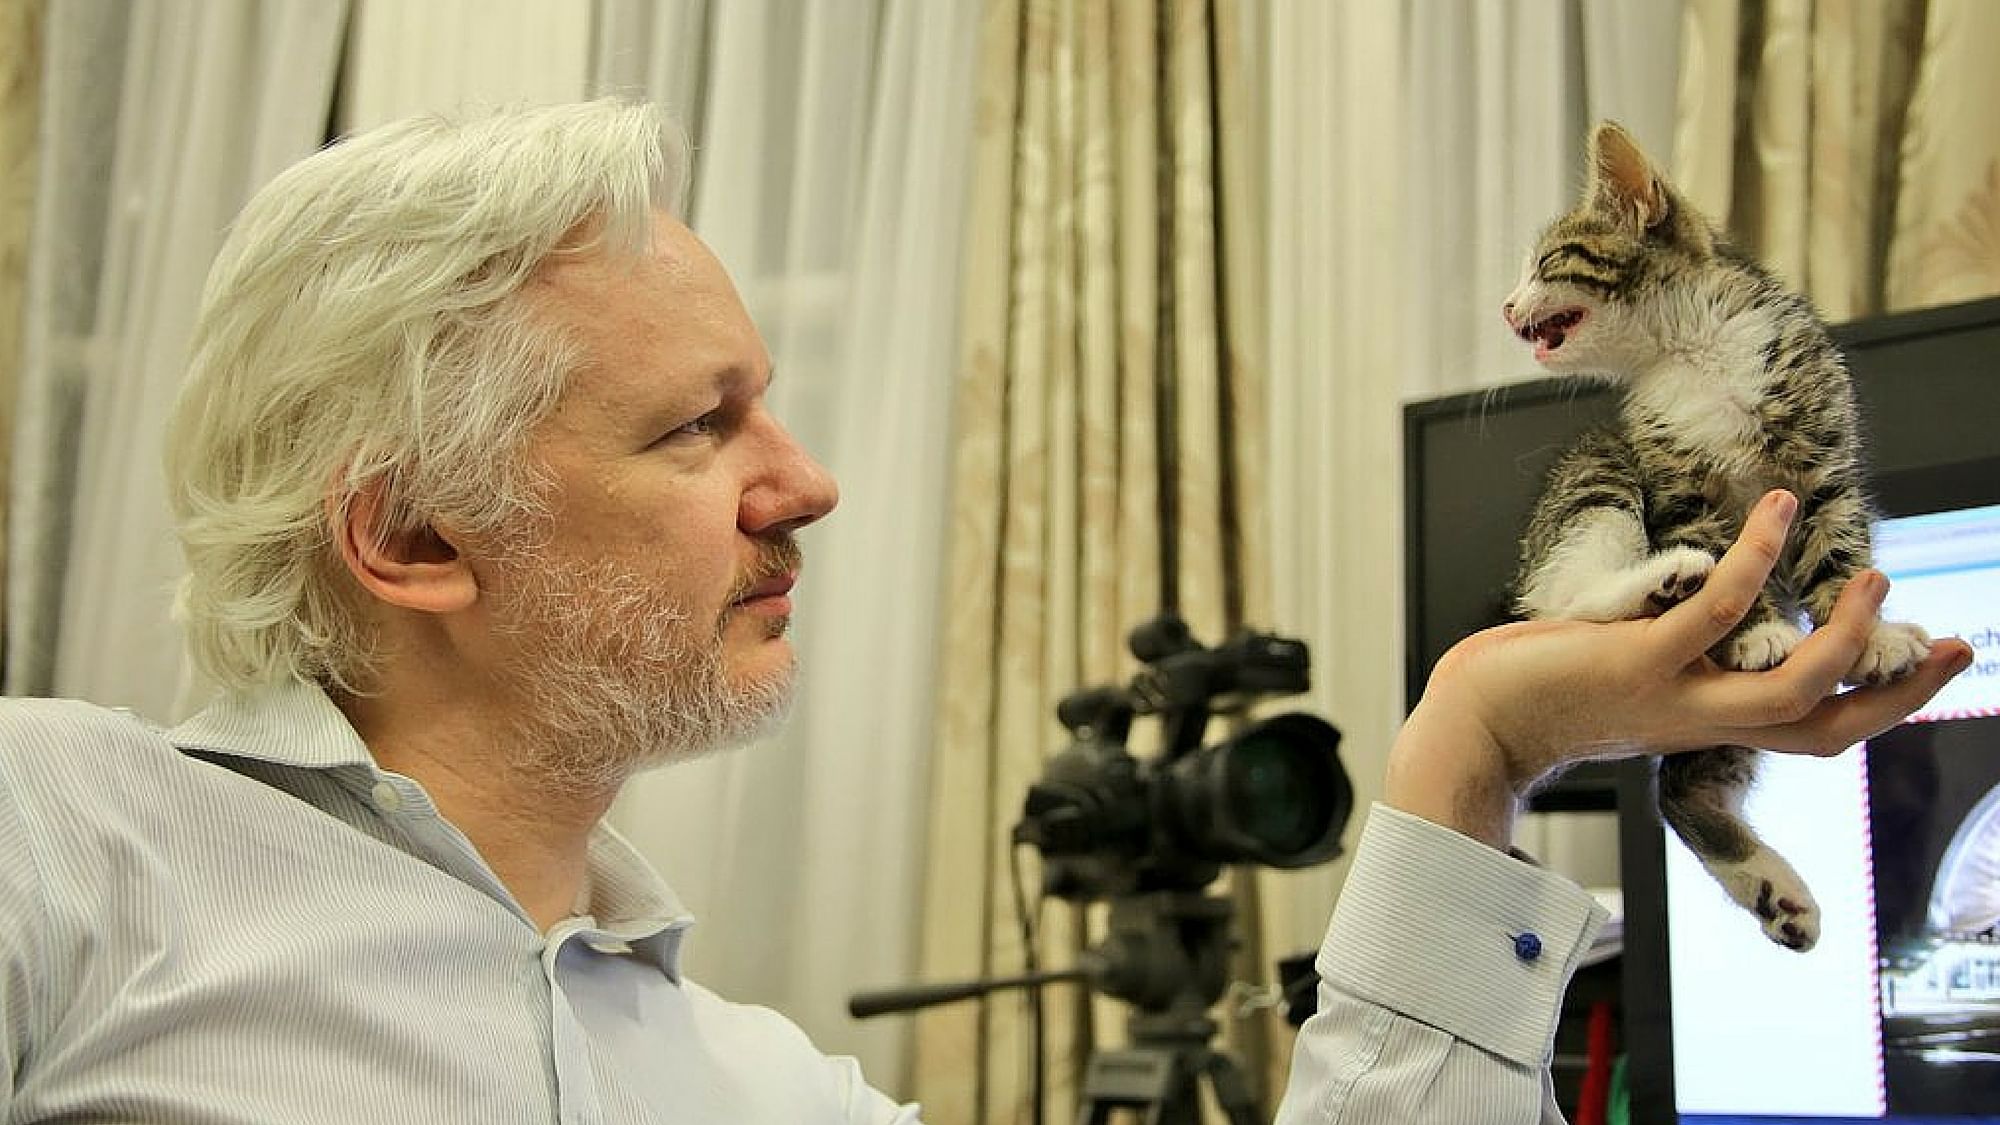 Julian Assange was arrested on 11 April by London Police from the Ecuadorian Embassy in London.